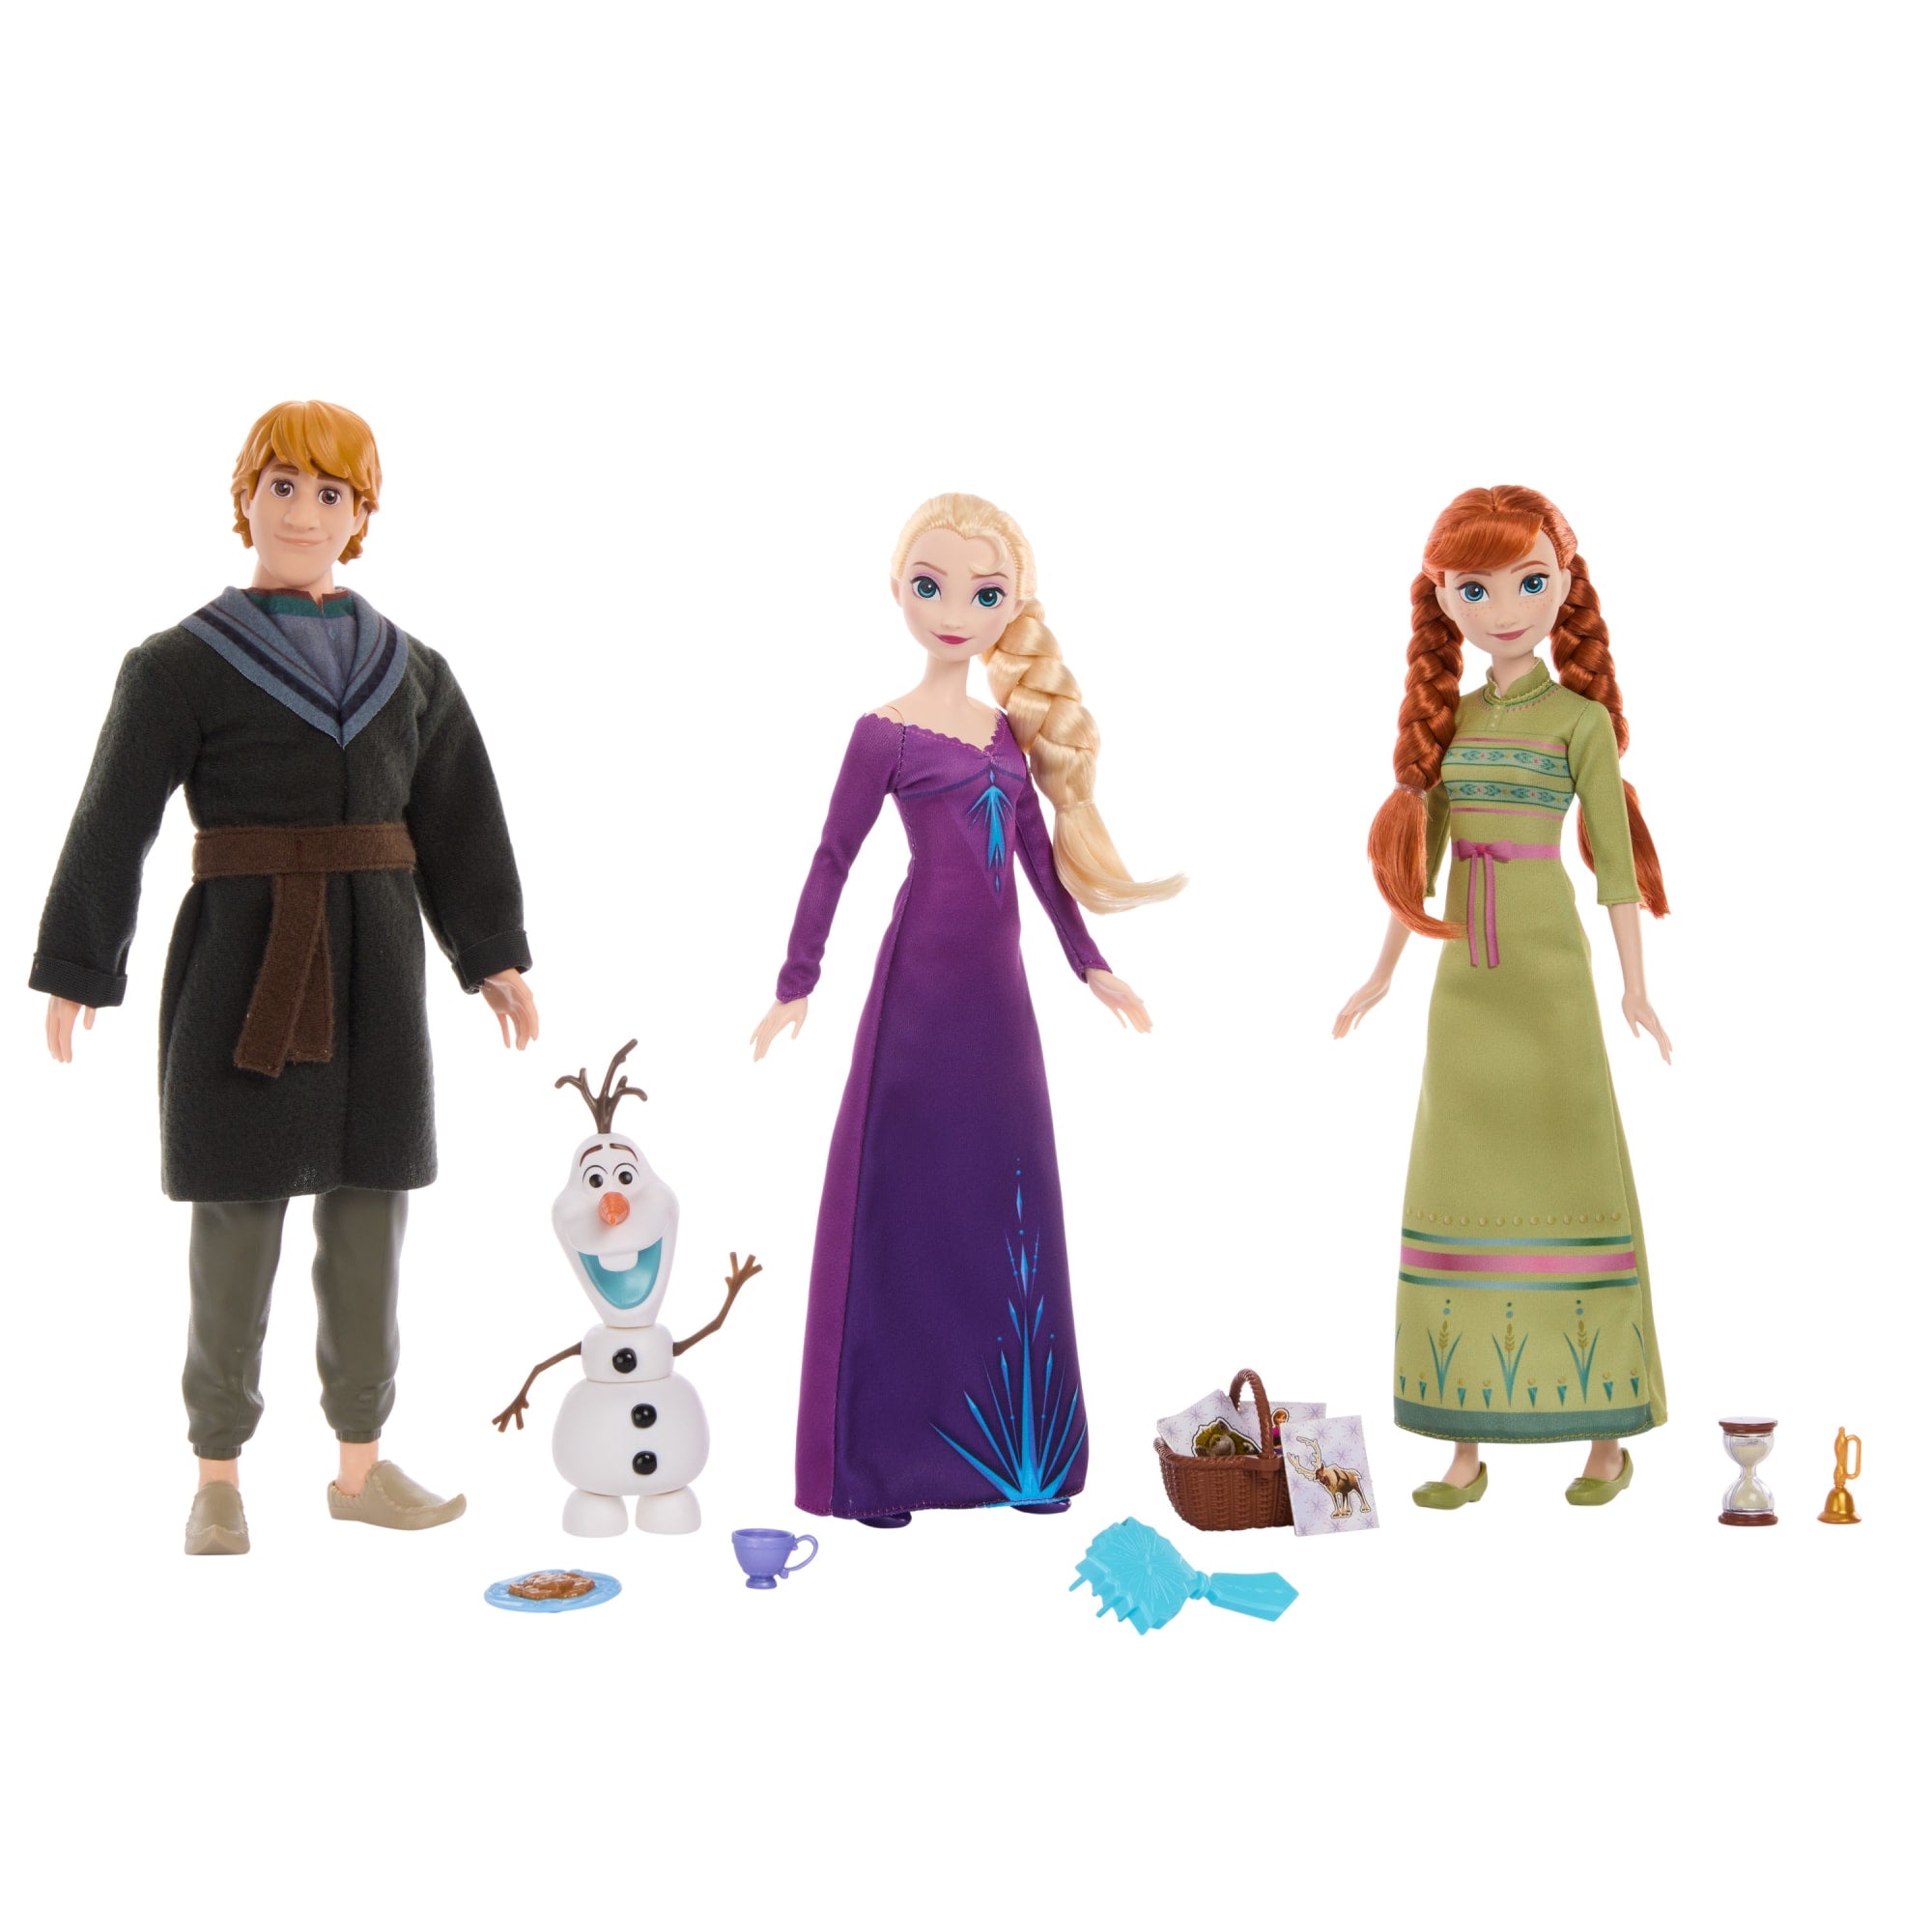 Disney Frozen Anna and Elsa Charades Play Pack